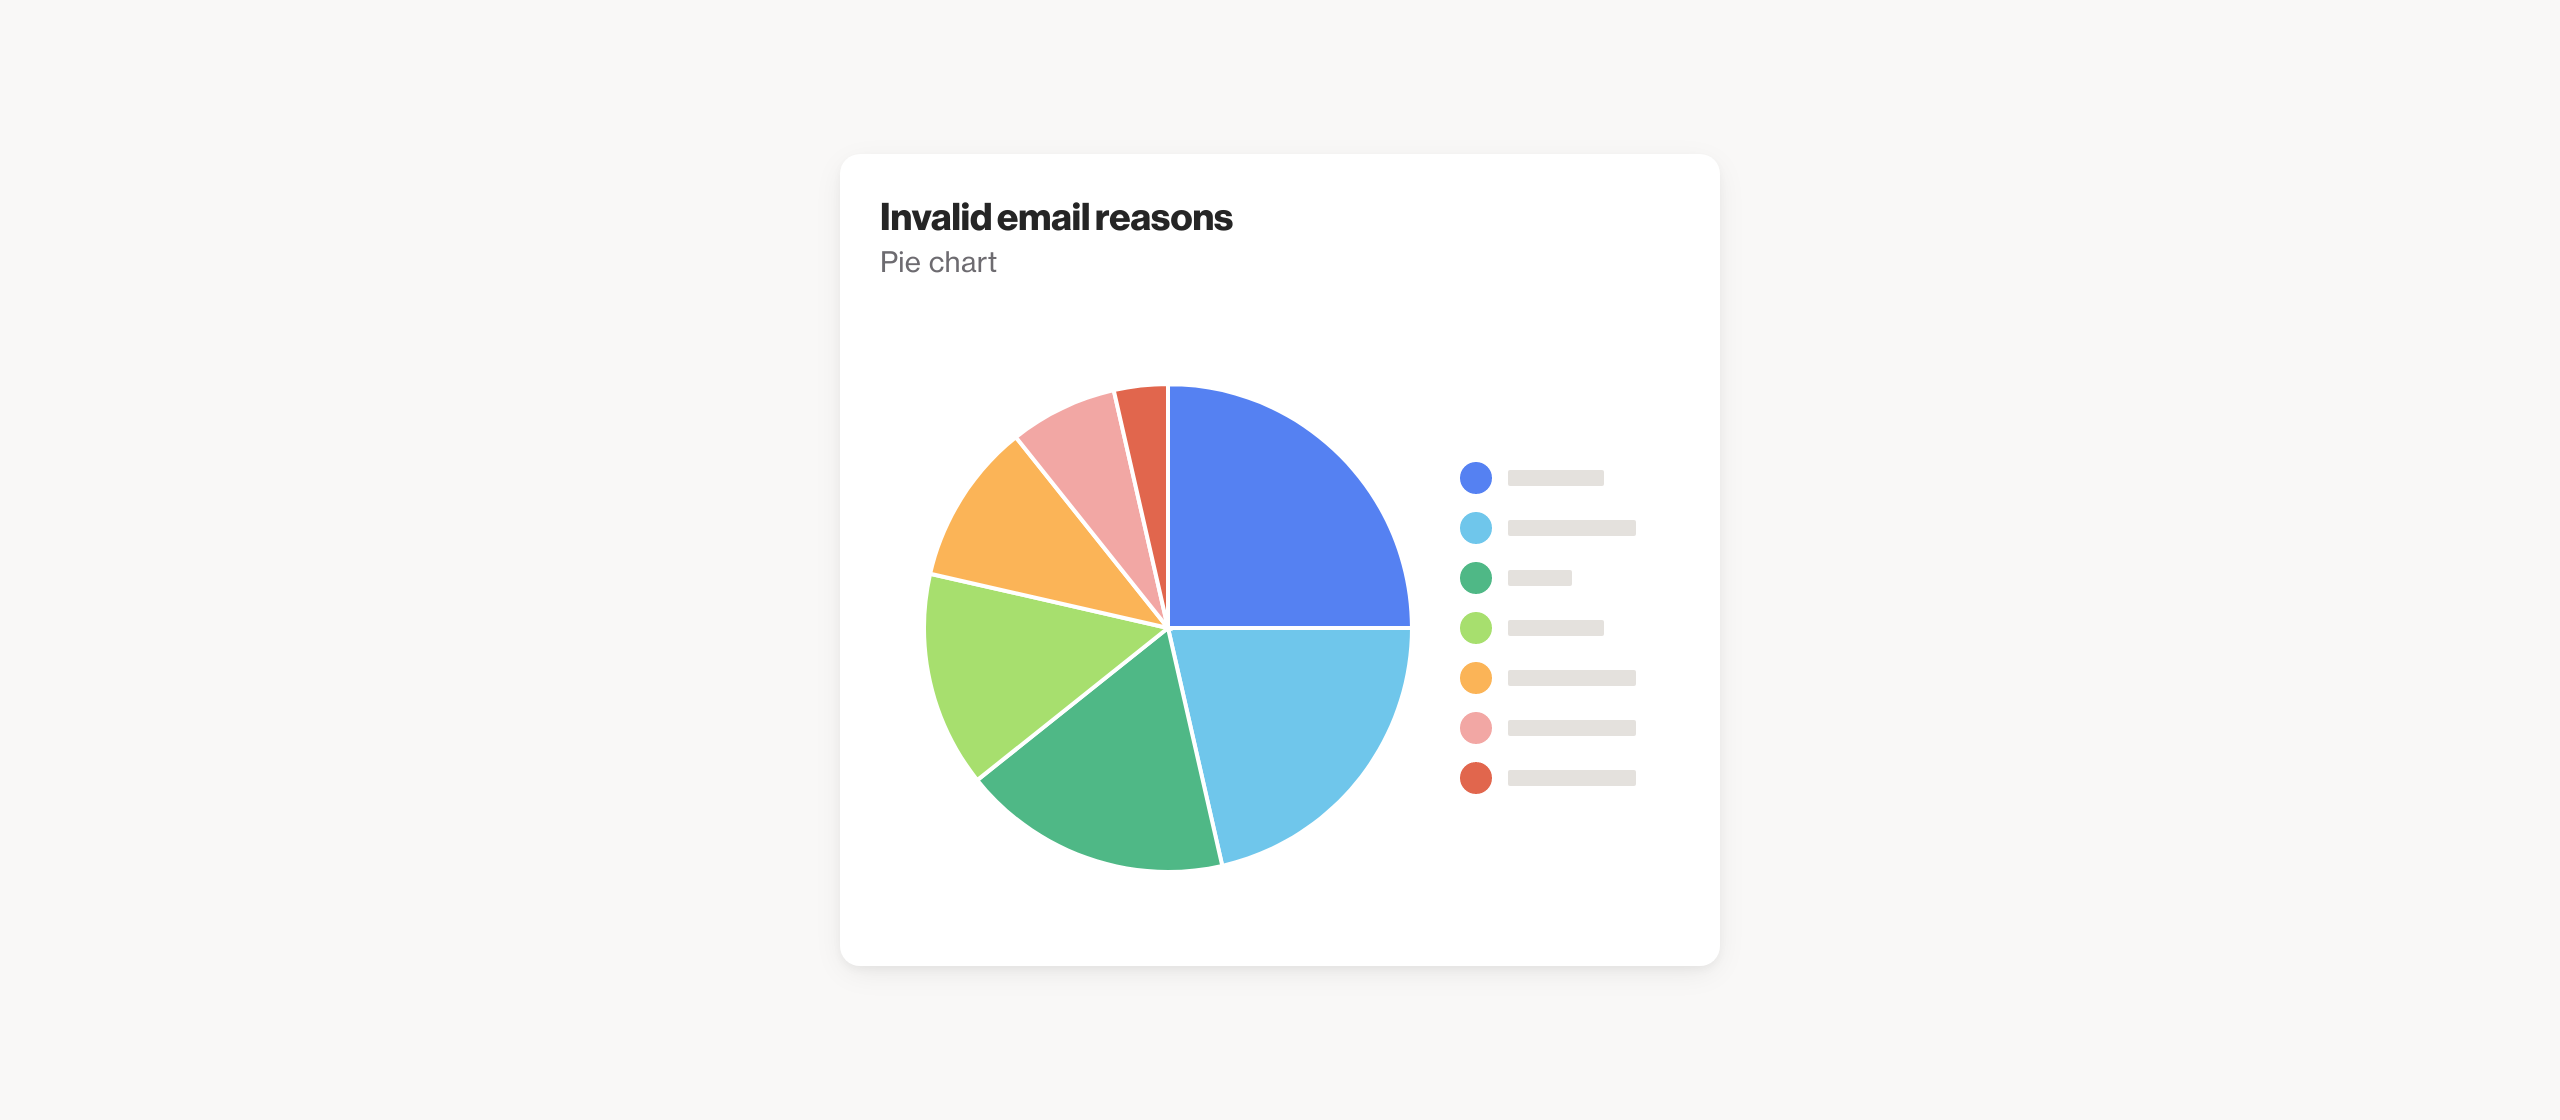 Invalid email reasons